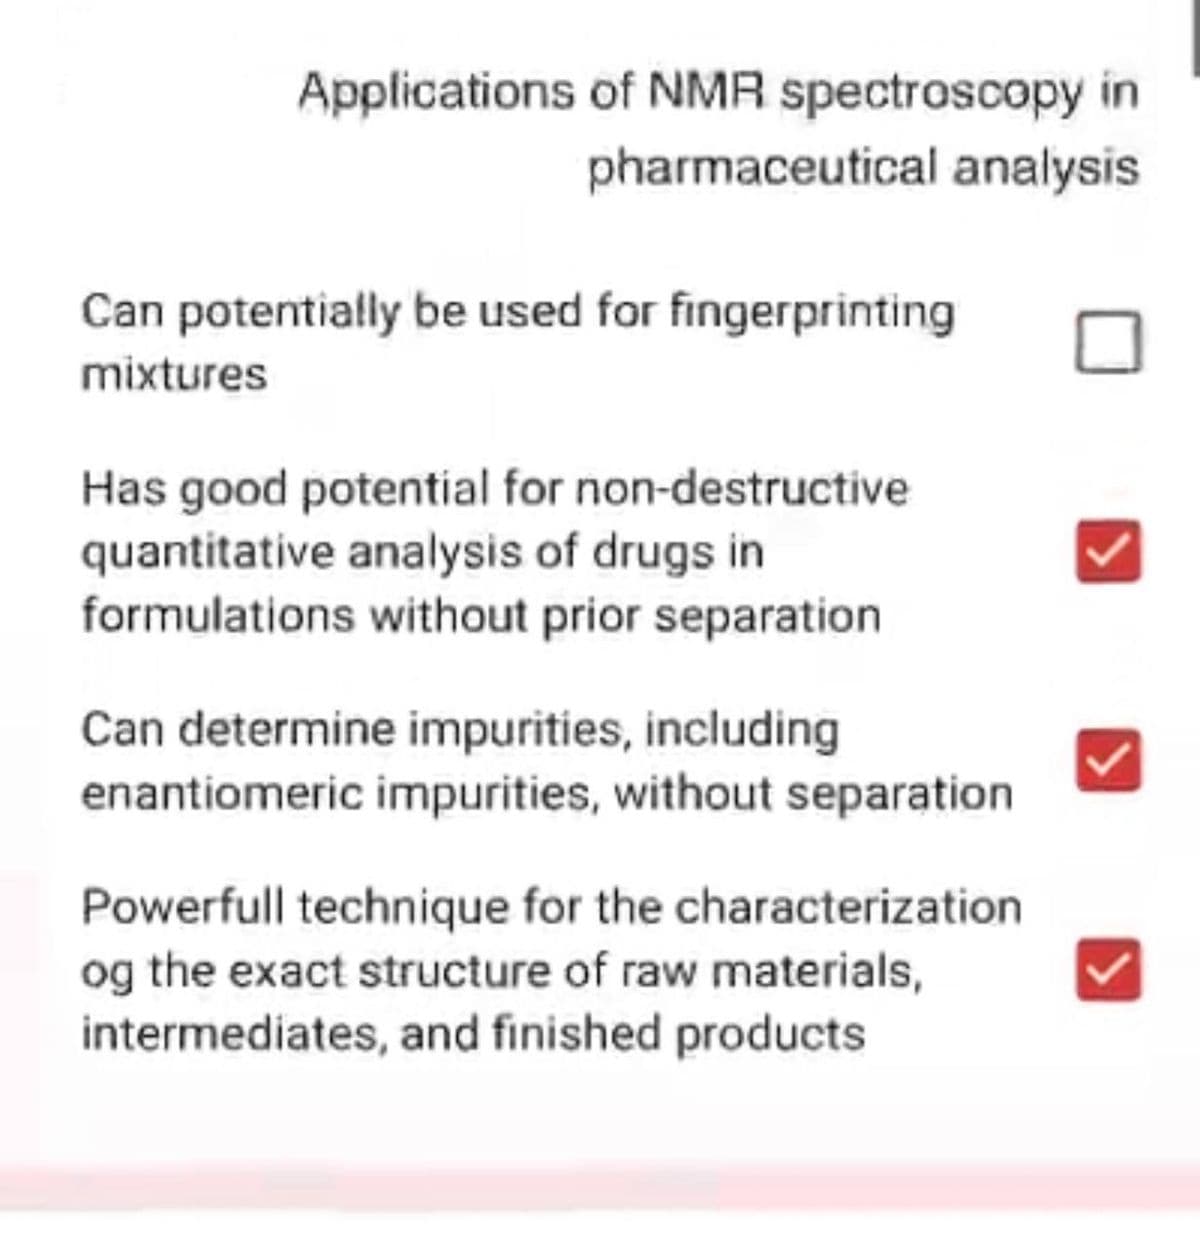 Applications of NMR spectroscopy in
pharmaceutical analysis
Can potentially be used for fingerprinting
mixtures
Has good potential for non-destructive
quantitative analysis of drugs in
formulations without prior separation
Can determine impurities, including
enantiomeric impurities, without separation
Powerfull technique for the characterization
og the exact structure of raw materials,
intermediates, and finished products